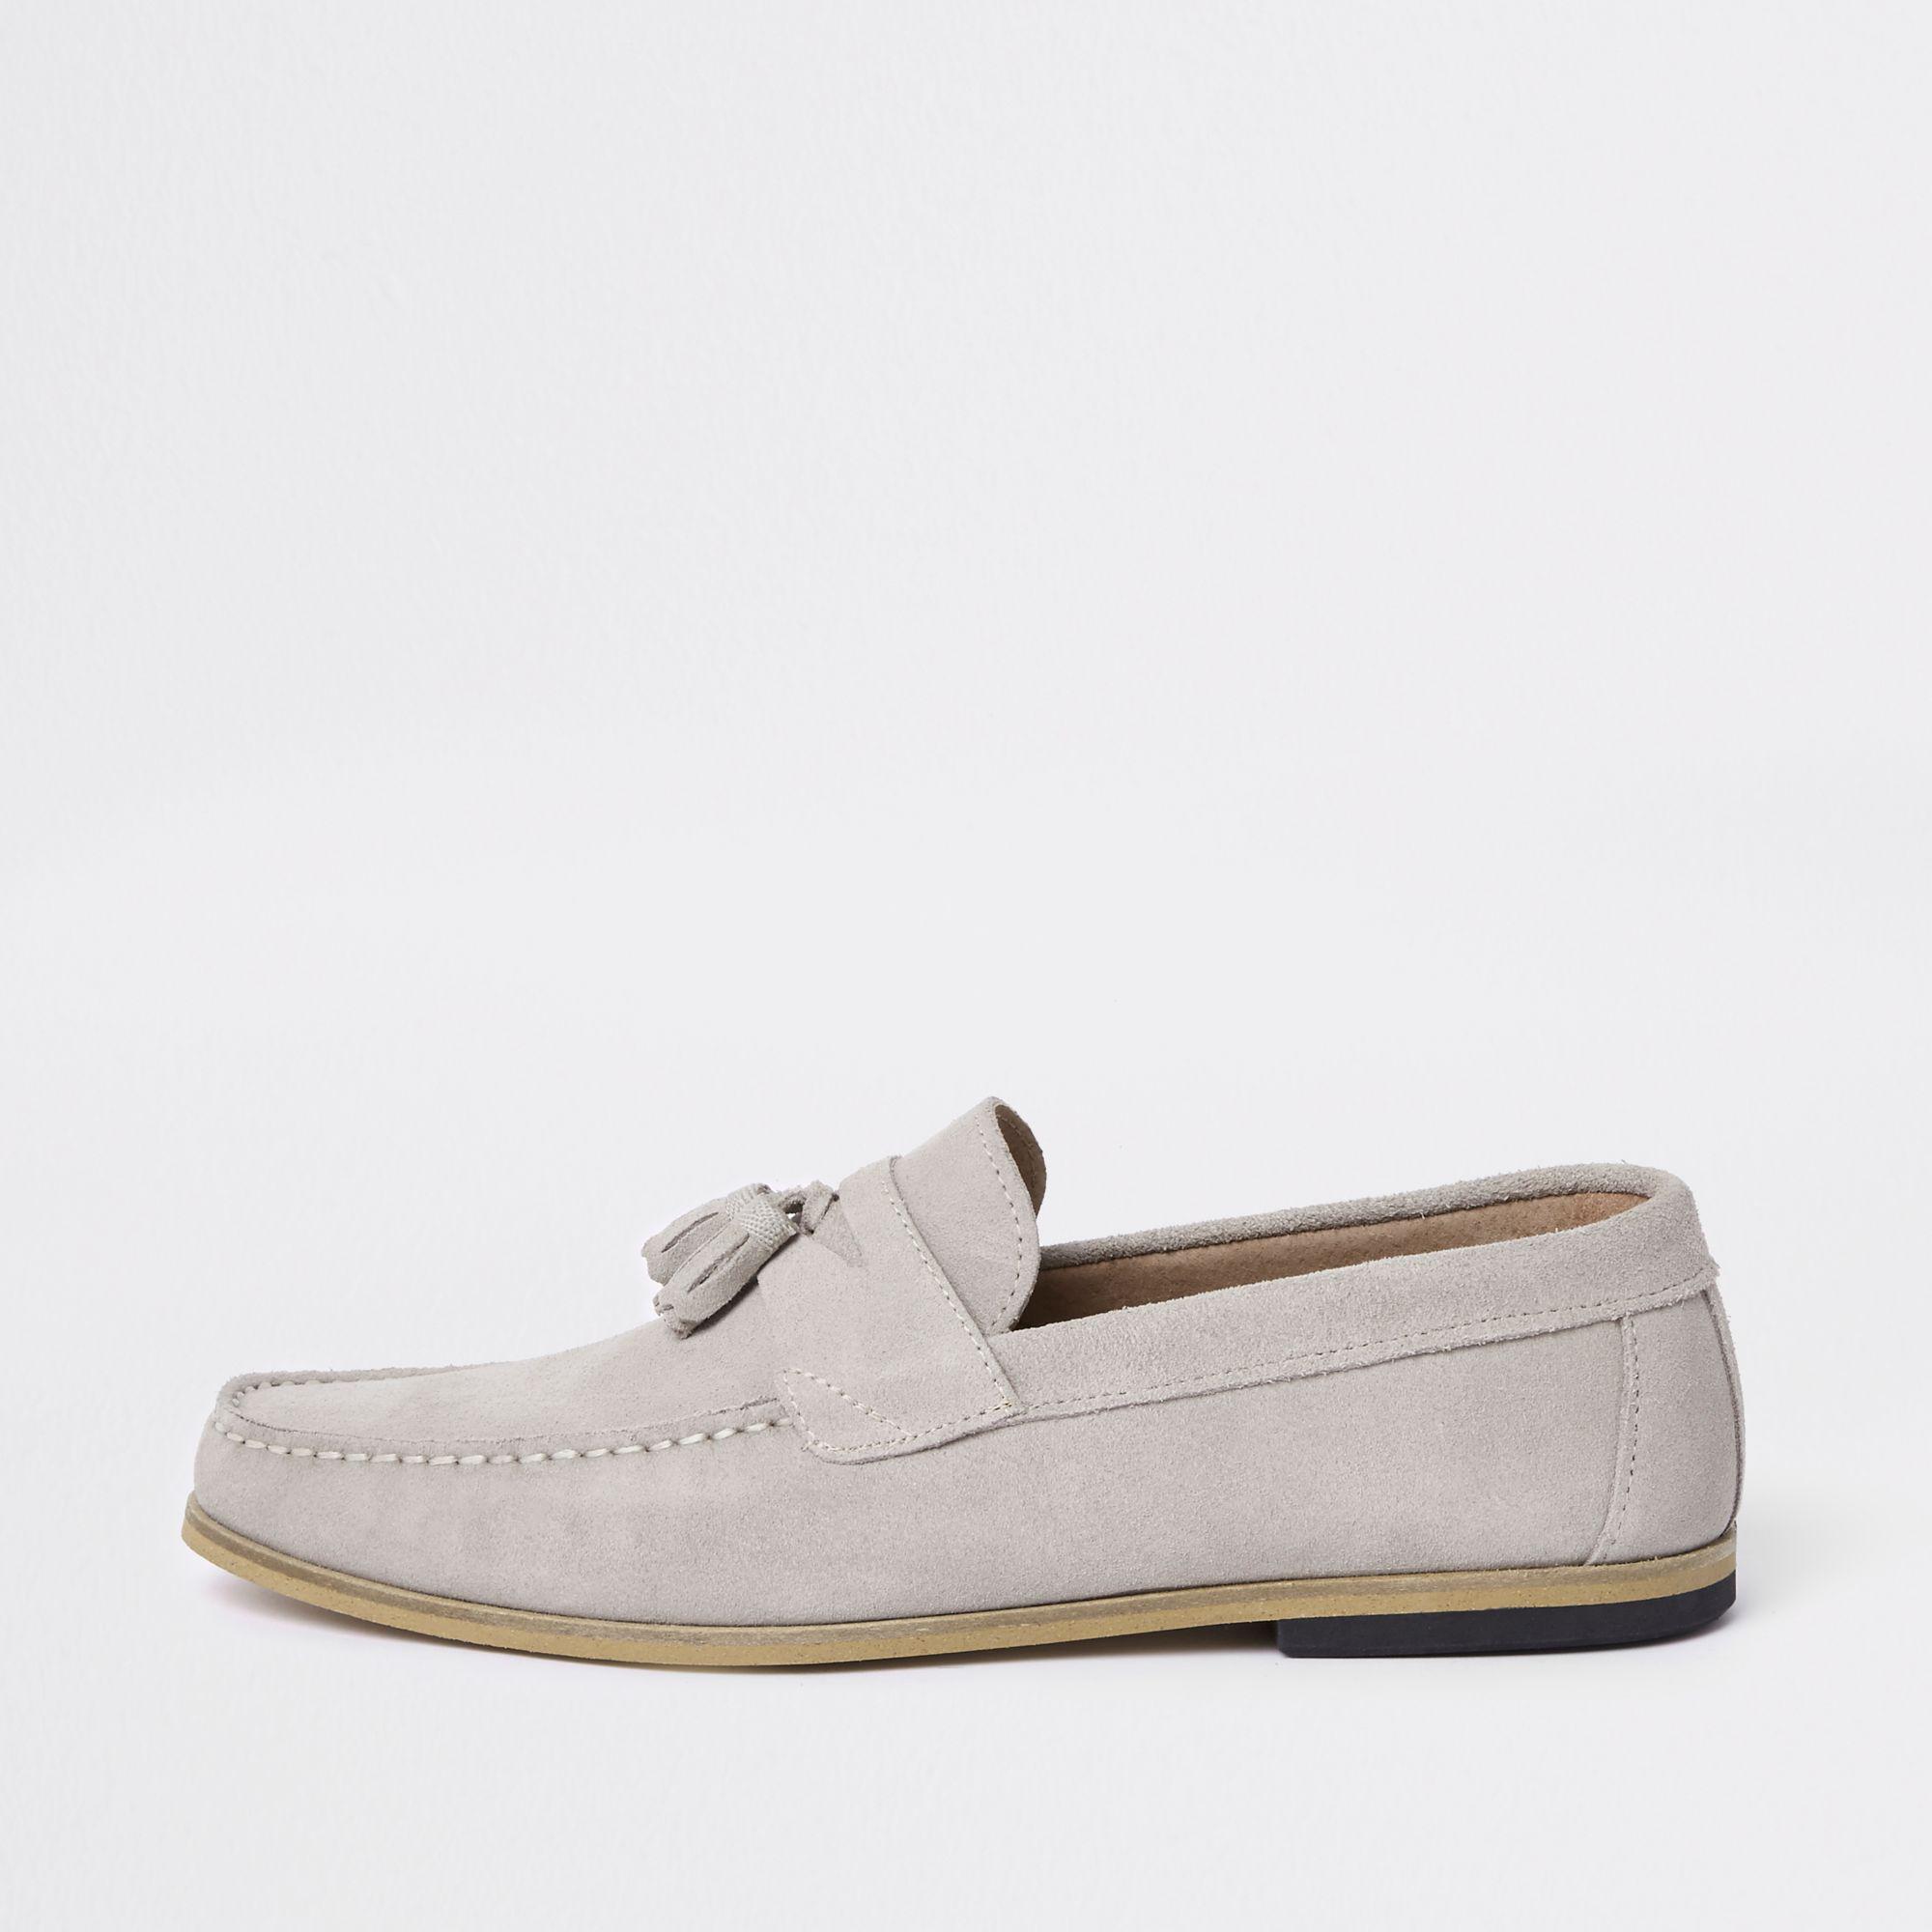 Lyst - River Island Ice Grey Suede Tassel Loafers in Gray for Men